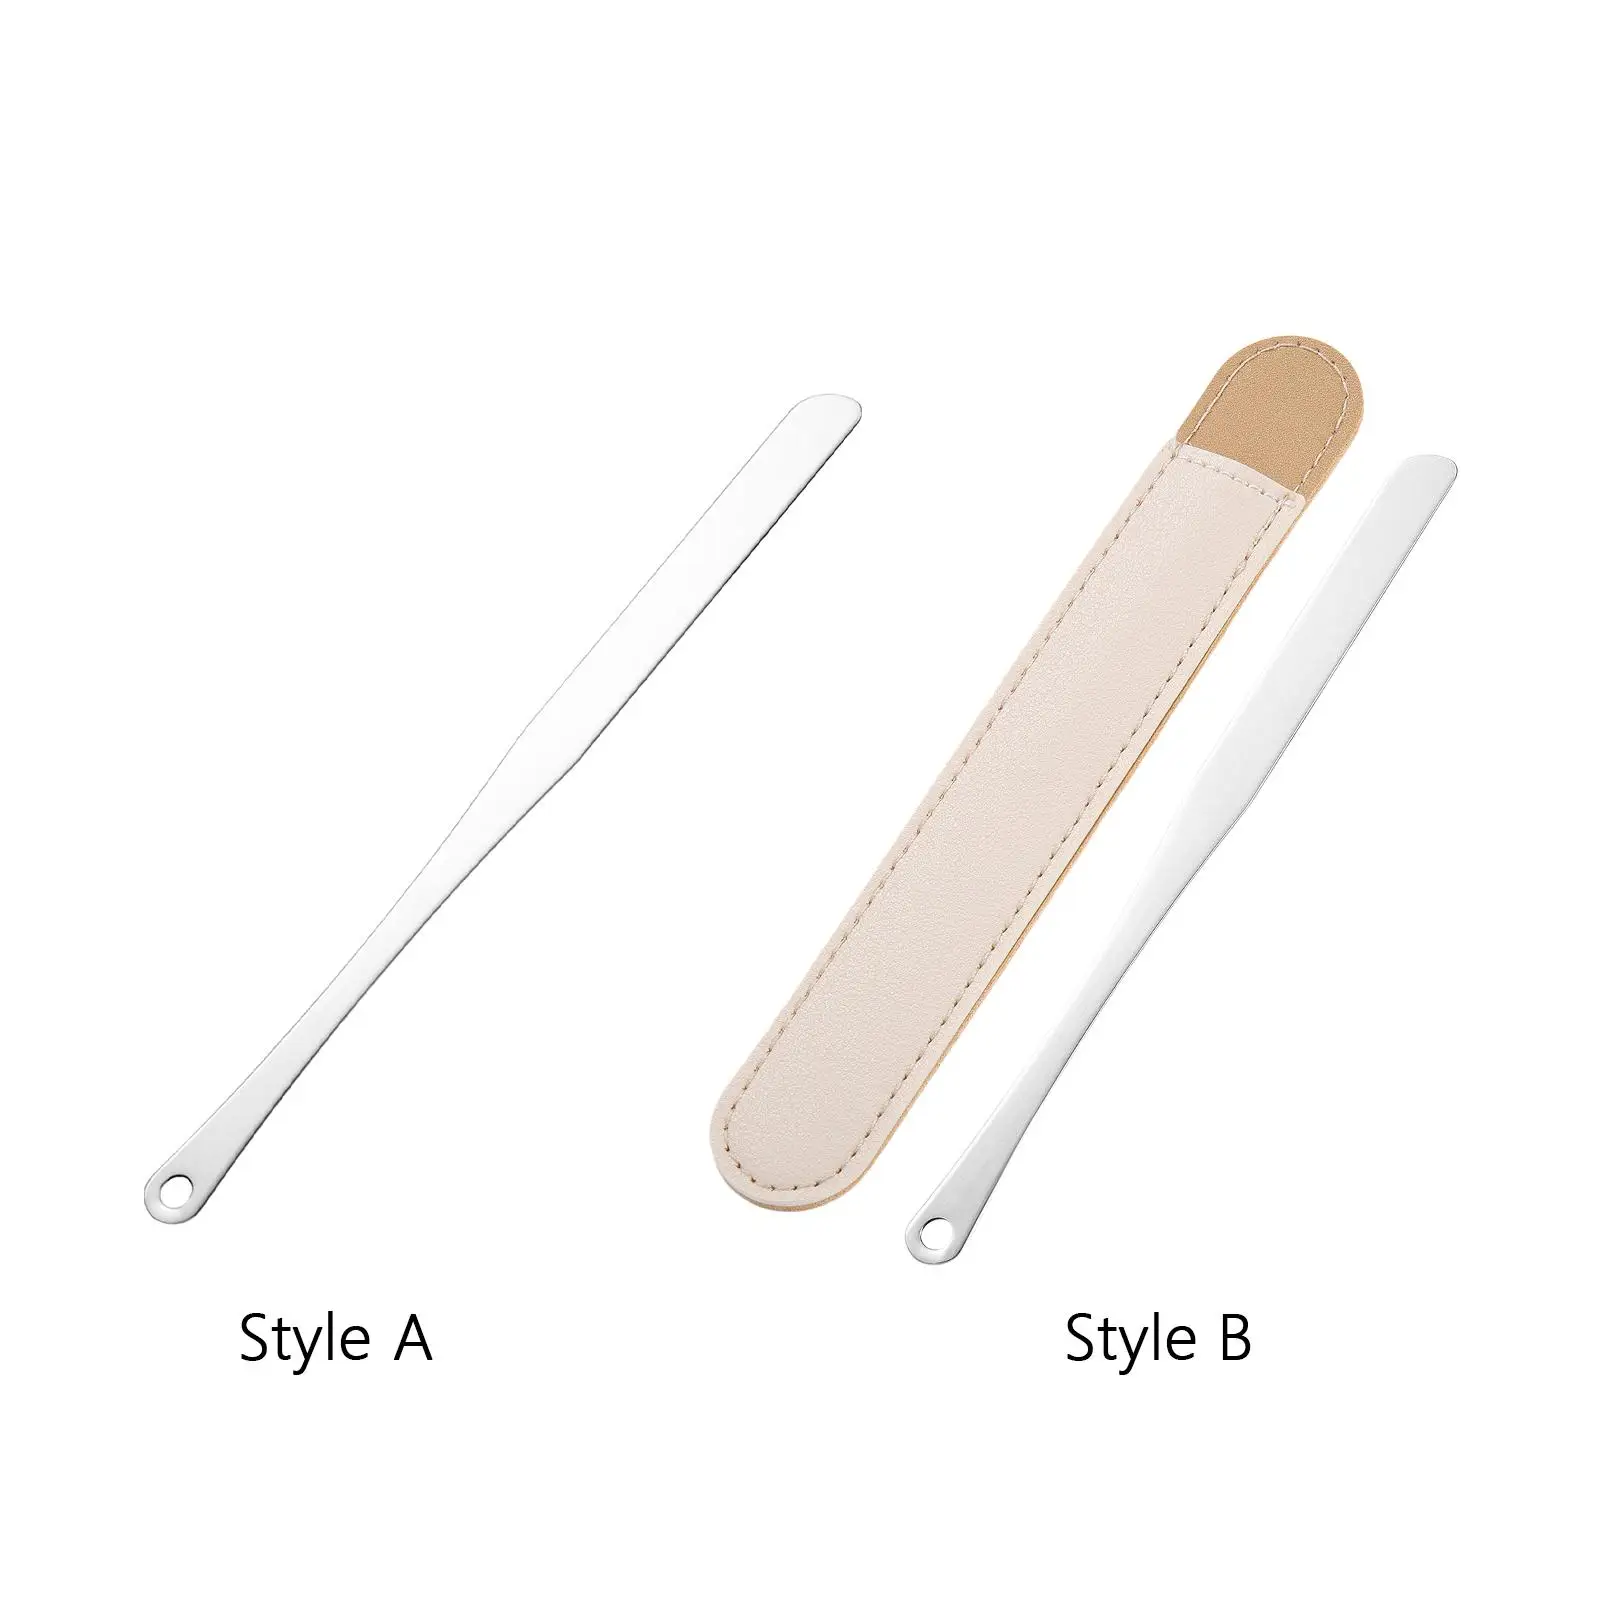 Makeup Spatulas Accessories Washable Cosmetic Mixing Bar Paddle Rod for Eye Shadow, Skin Perfect Gifts Household Use Teen